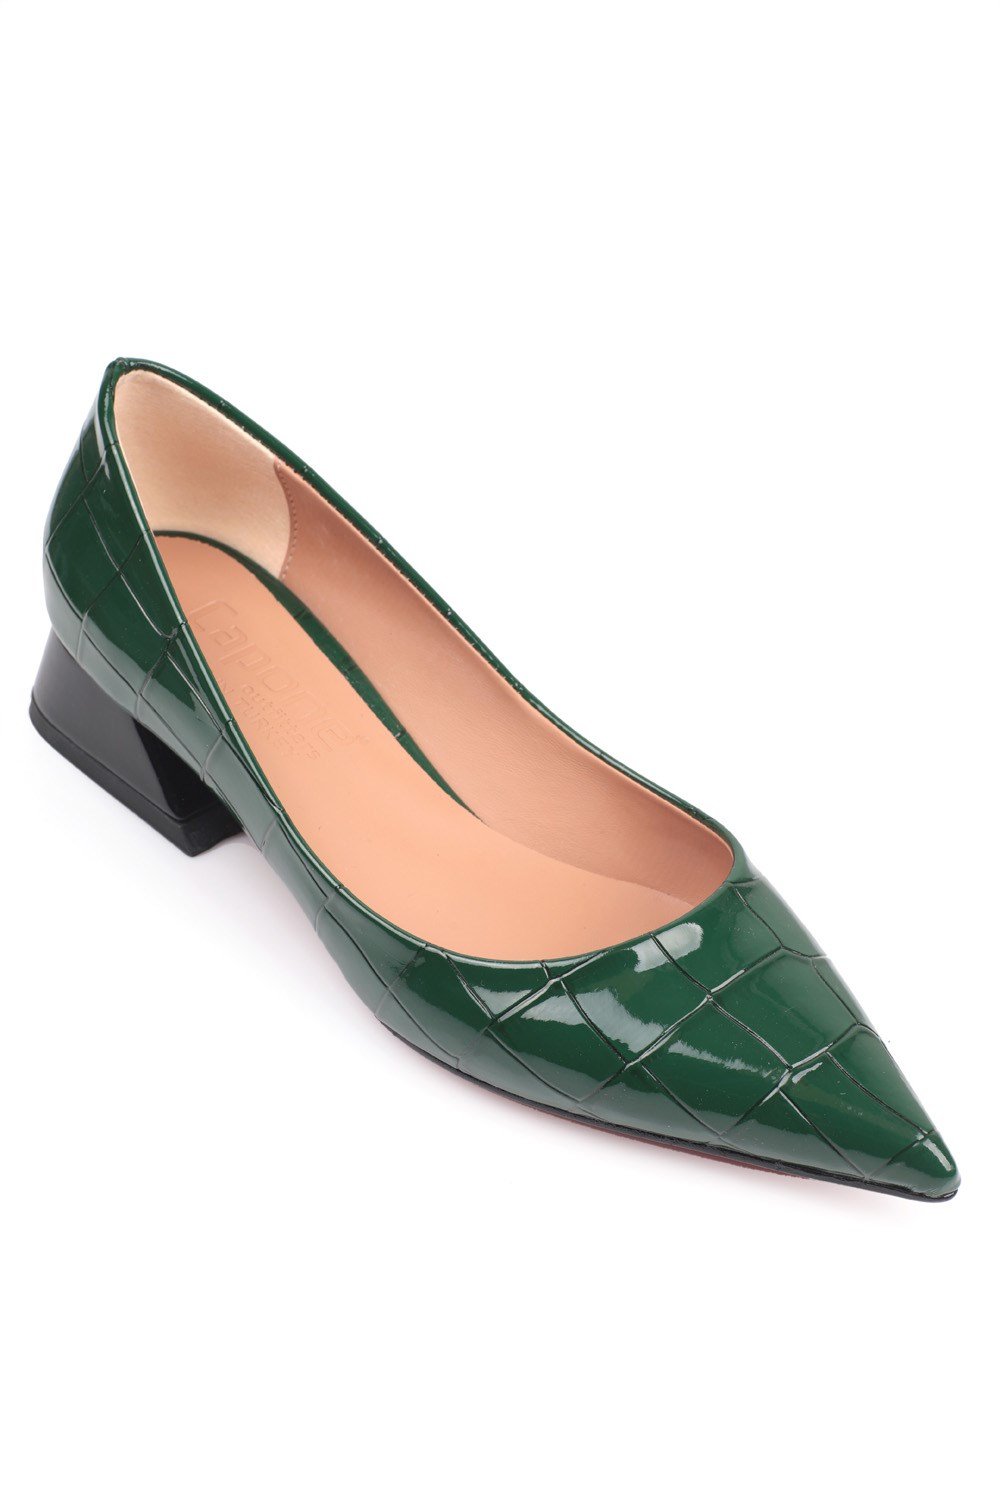 Capone Jessica Low Heel Women Dark Green Shoes | caponeoutfitters.com